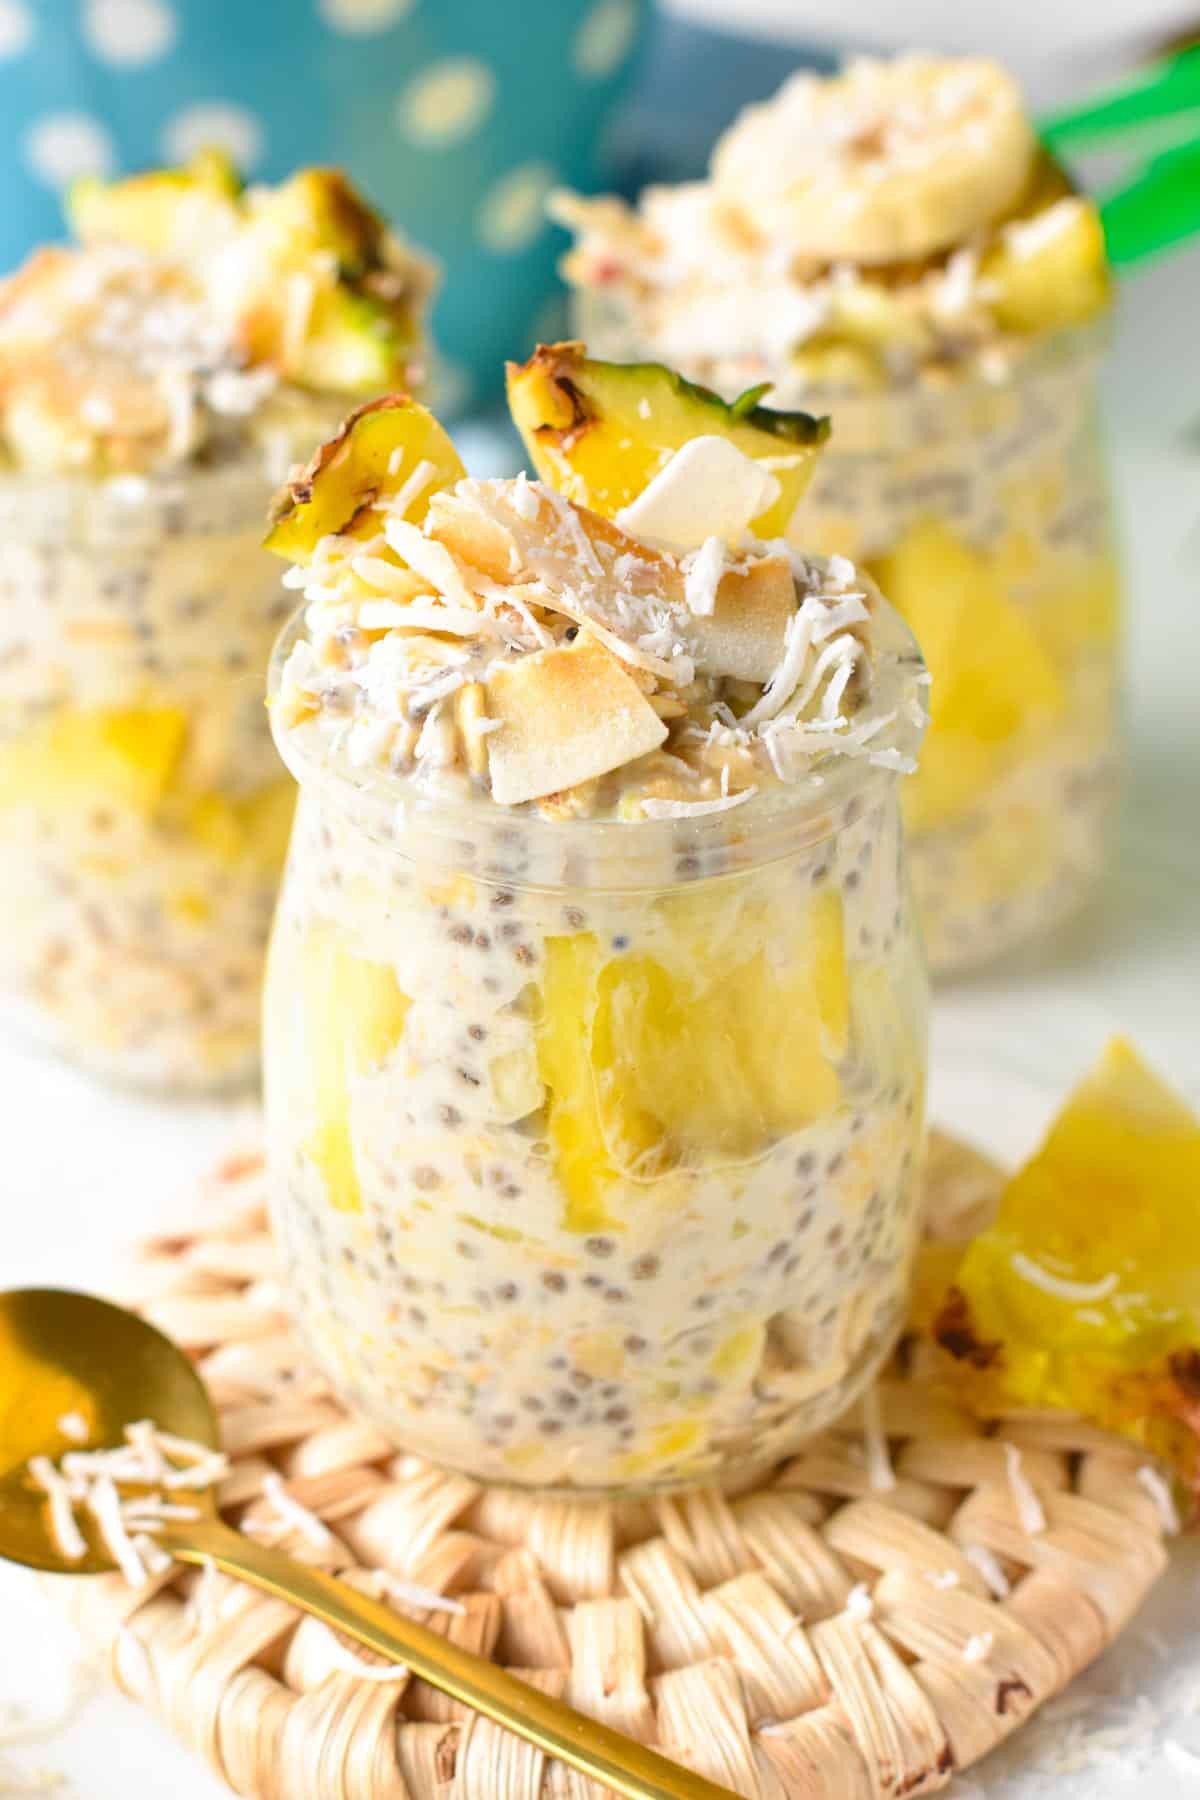 This Pina Colada Overnight Oats is a dream healthy breakfast with delicious tropical flavors from coconut and pineapple. If you are a Pina colada lover, this healthy breakfast recipe is for you.